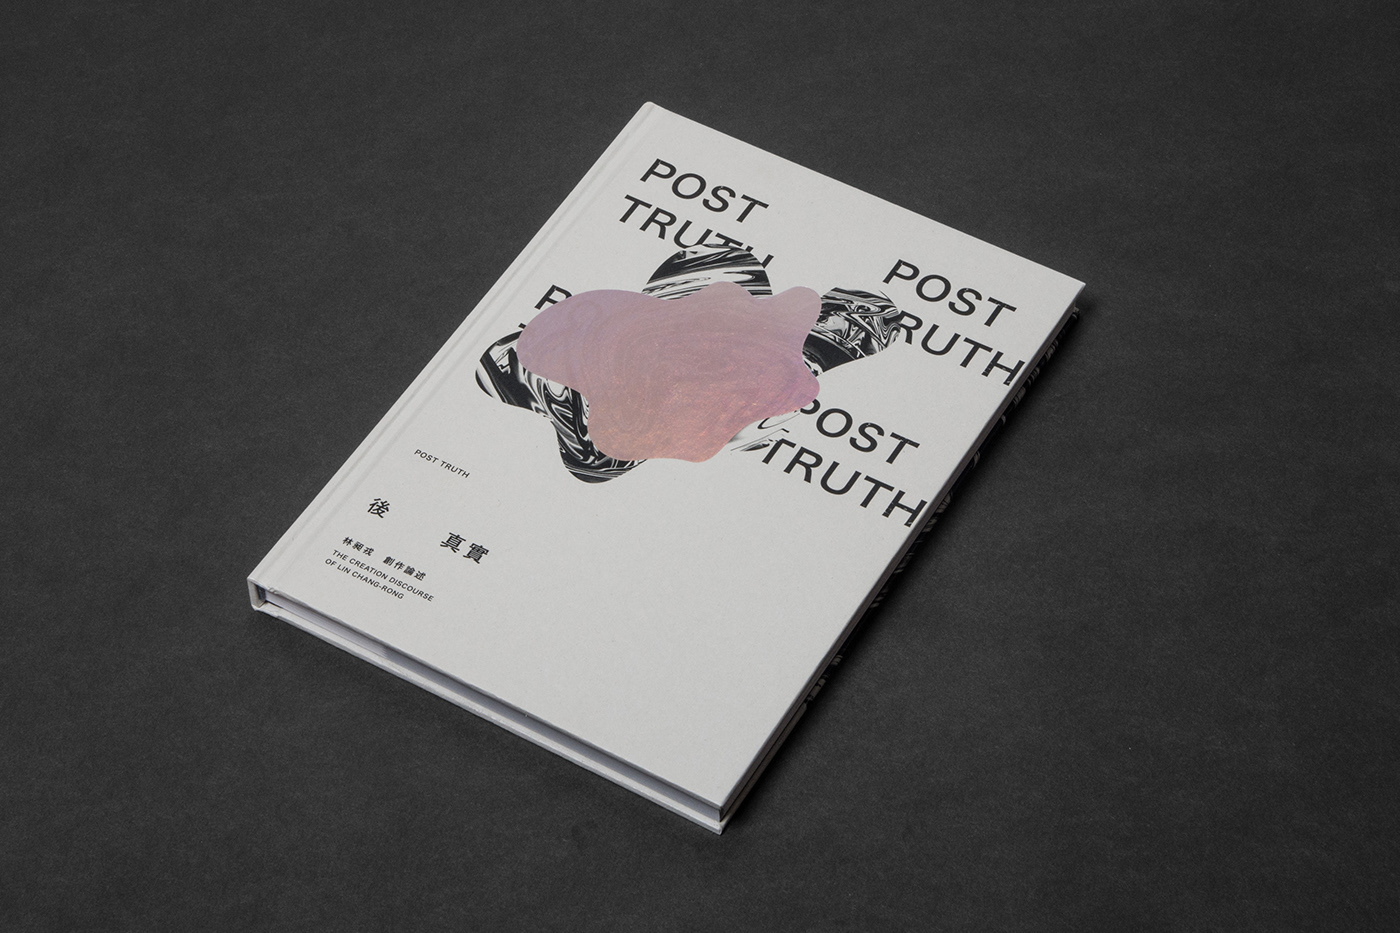 art book book design editorial graphic design  Layout post post truth publisher truth